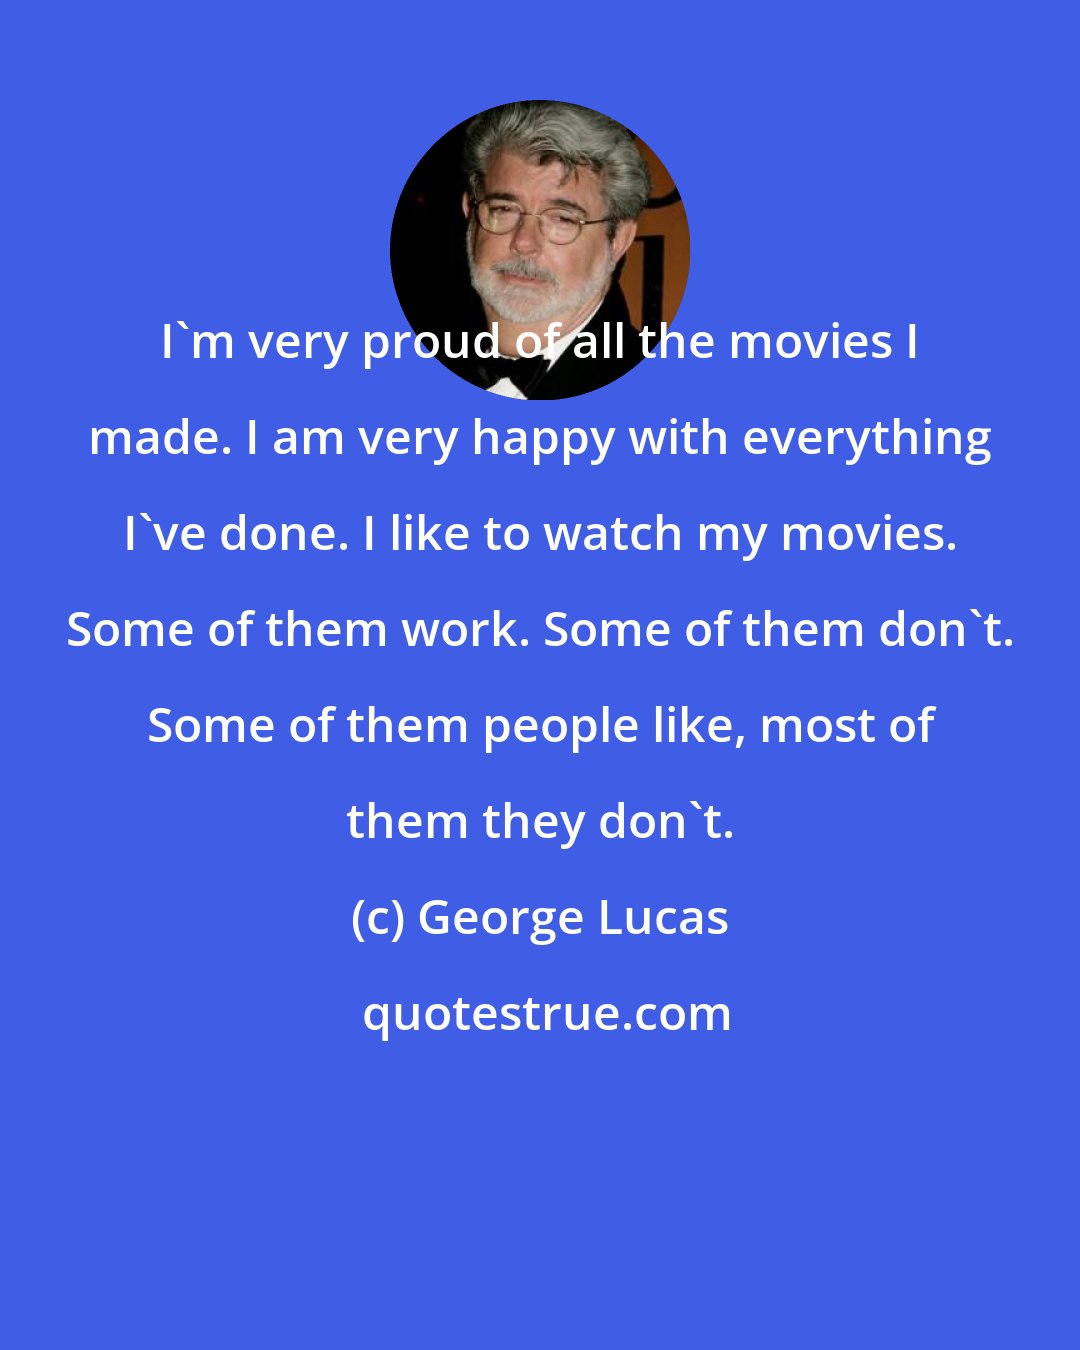 George Lucas: I'm very proud of all the movies I made. I am very happy with everything I've done. I like to watch my movies. Some of them work. Some of them don't. Some of them people like, most of them they don't.